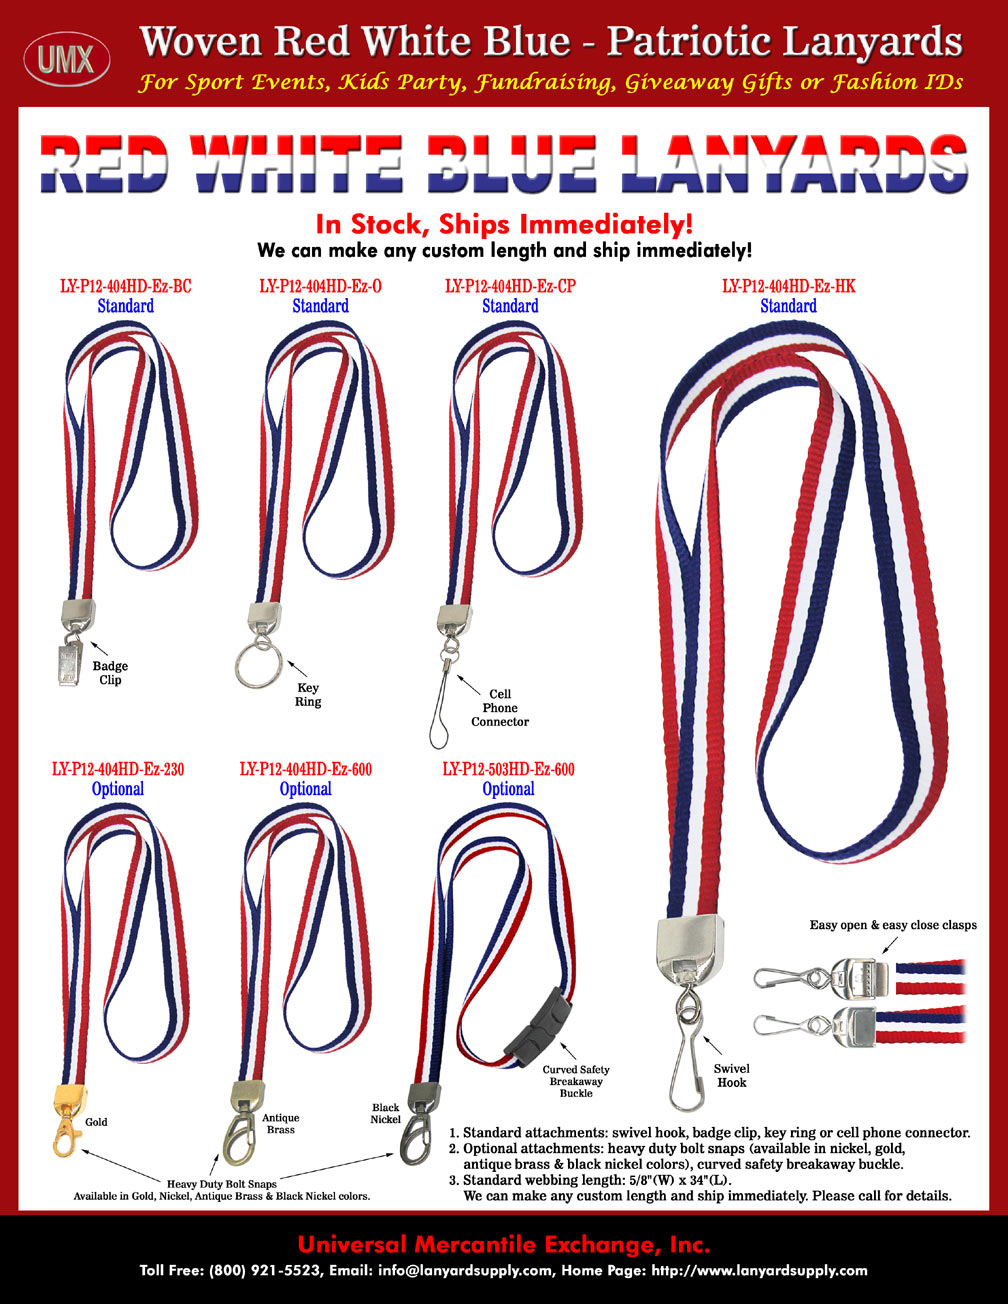 Lanyards With Woven Red-White-Blue Stripes For Cell Phone Straps and Medal Award Neck Ribbon Lanyard Supplies